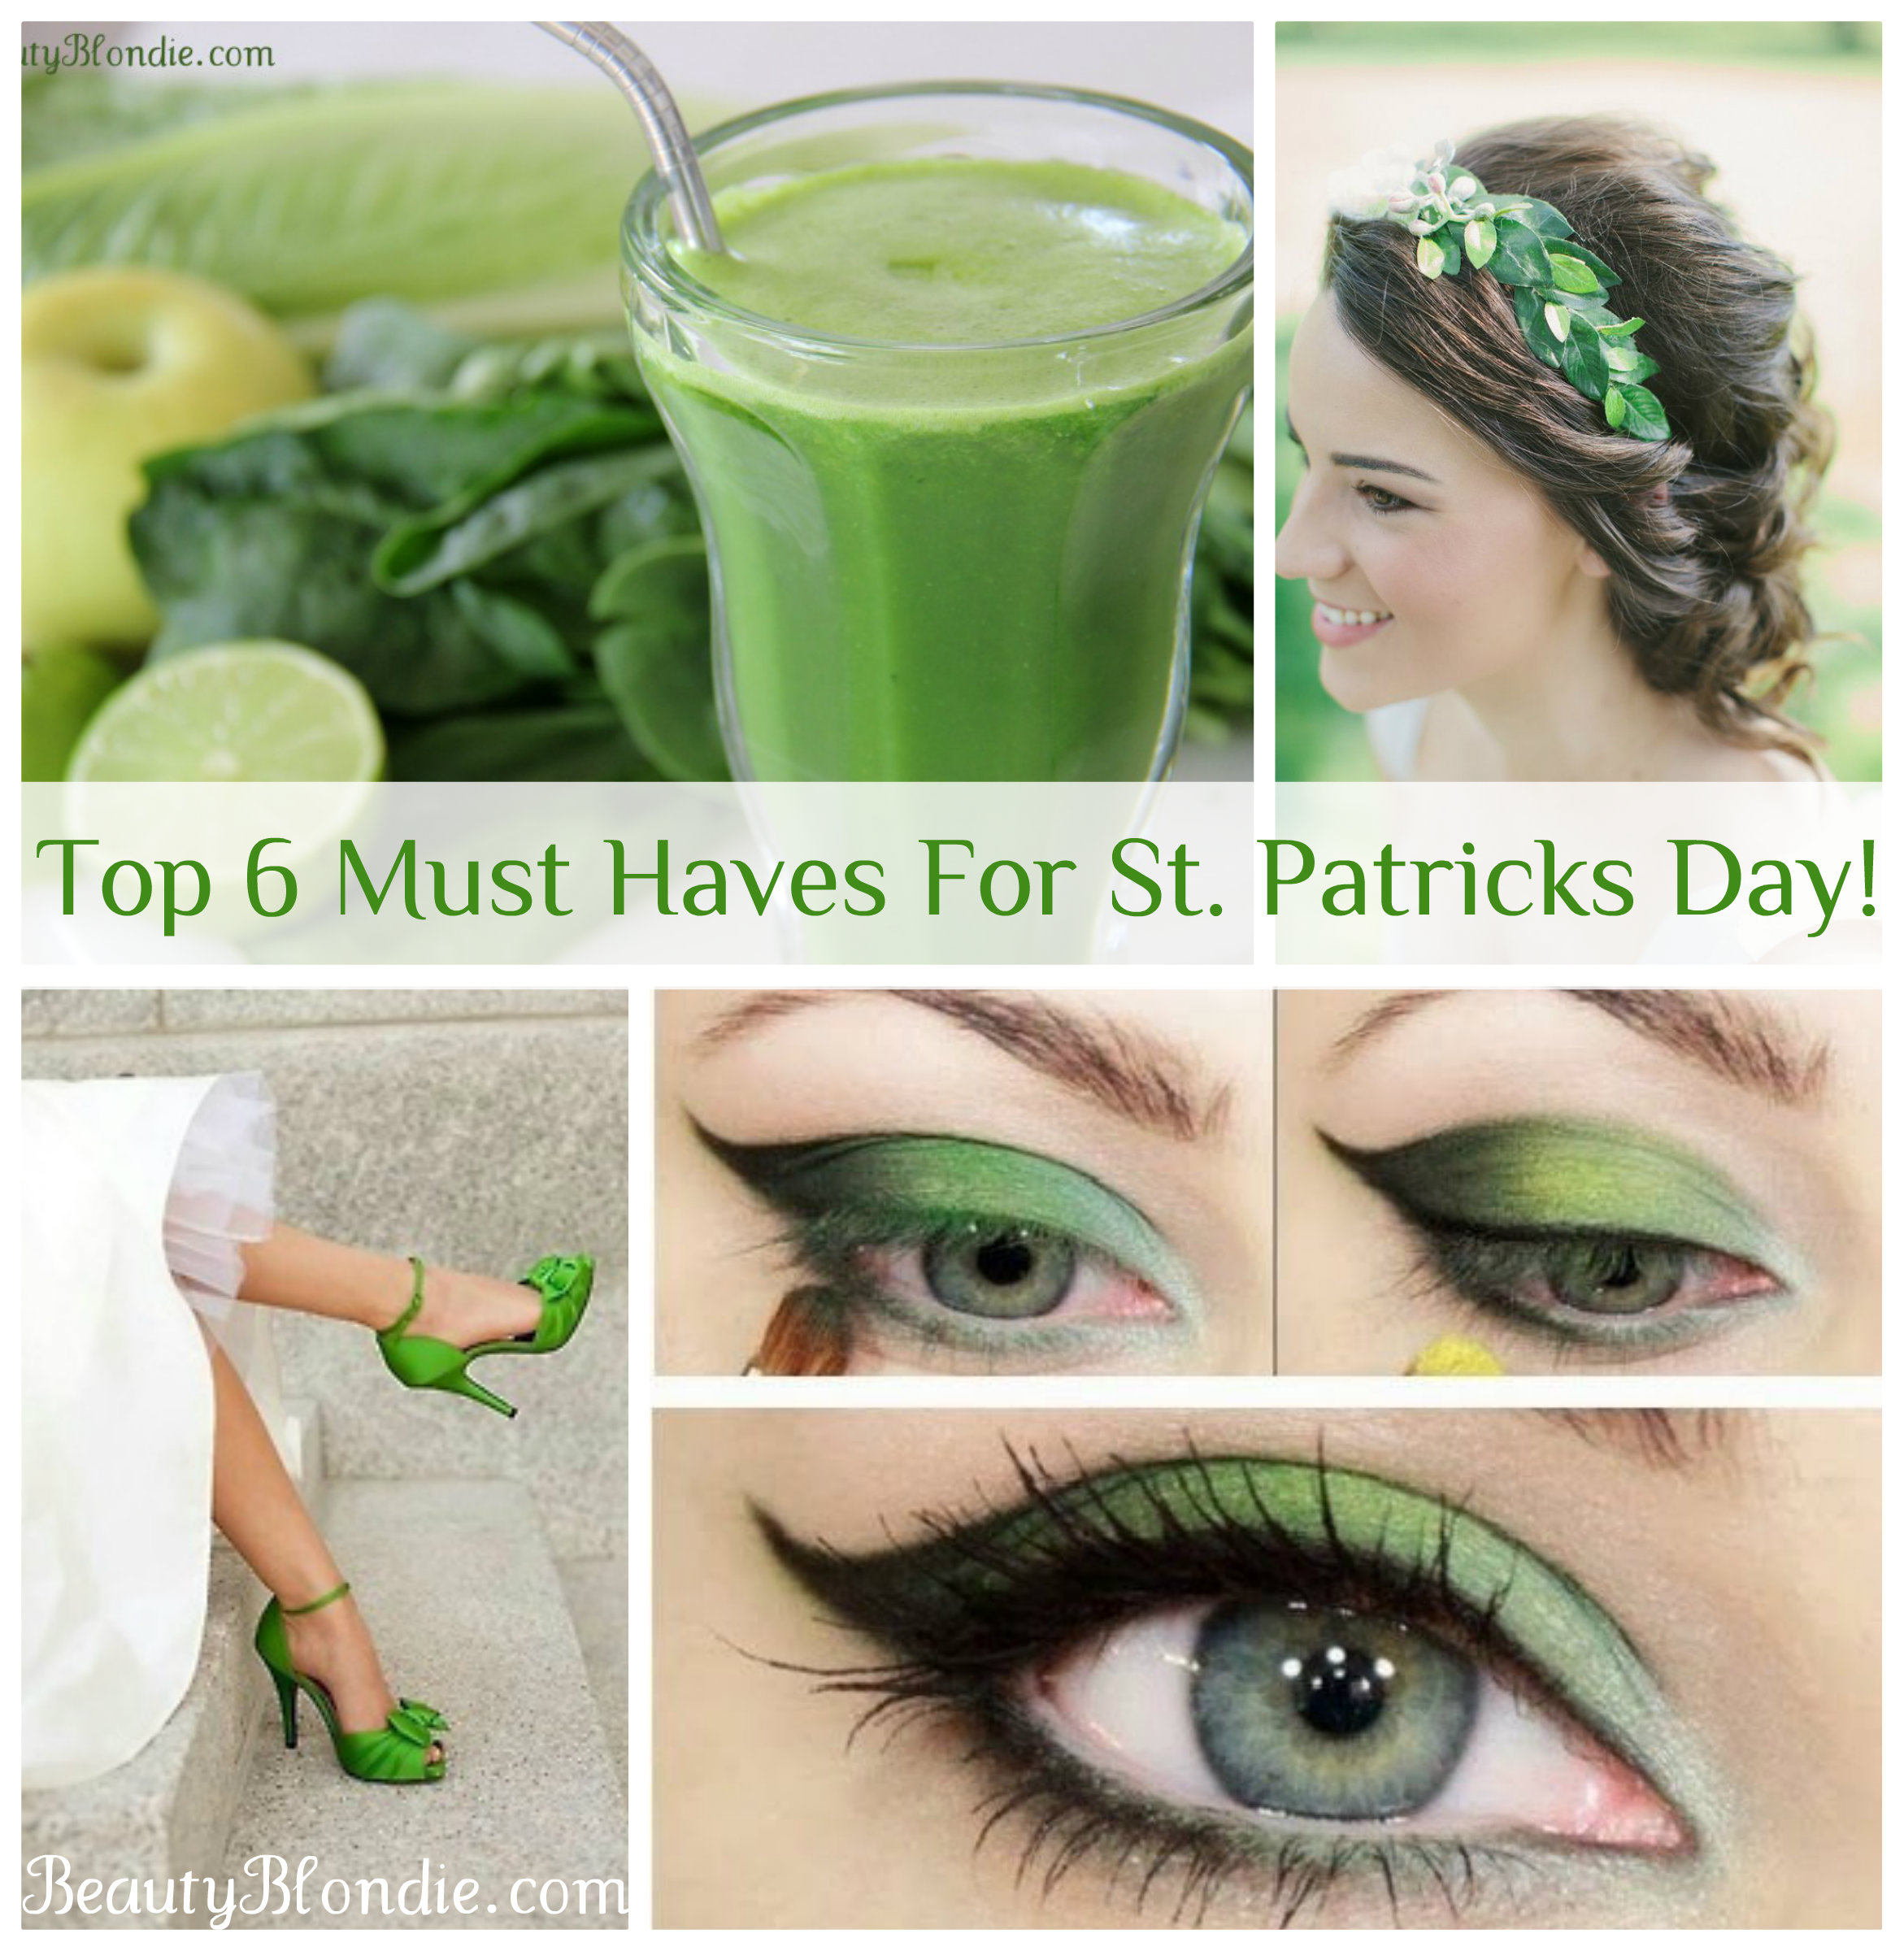 Top 6 Must Haves for St. Patrick’s Day!